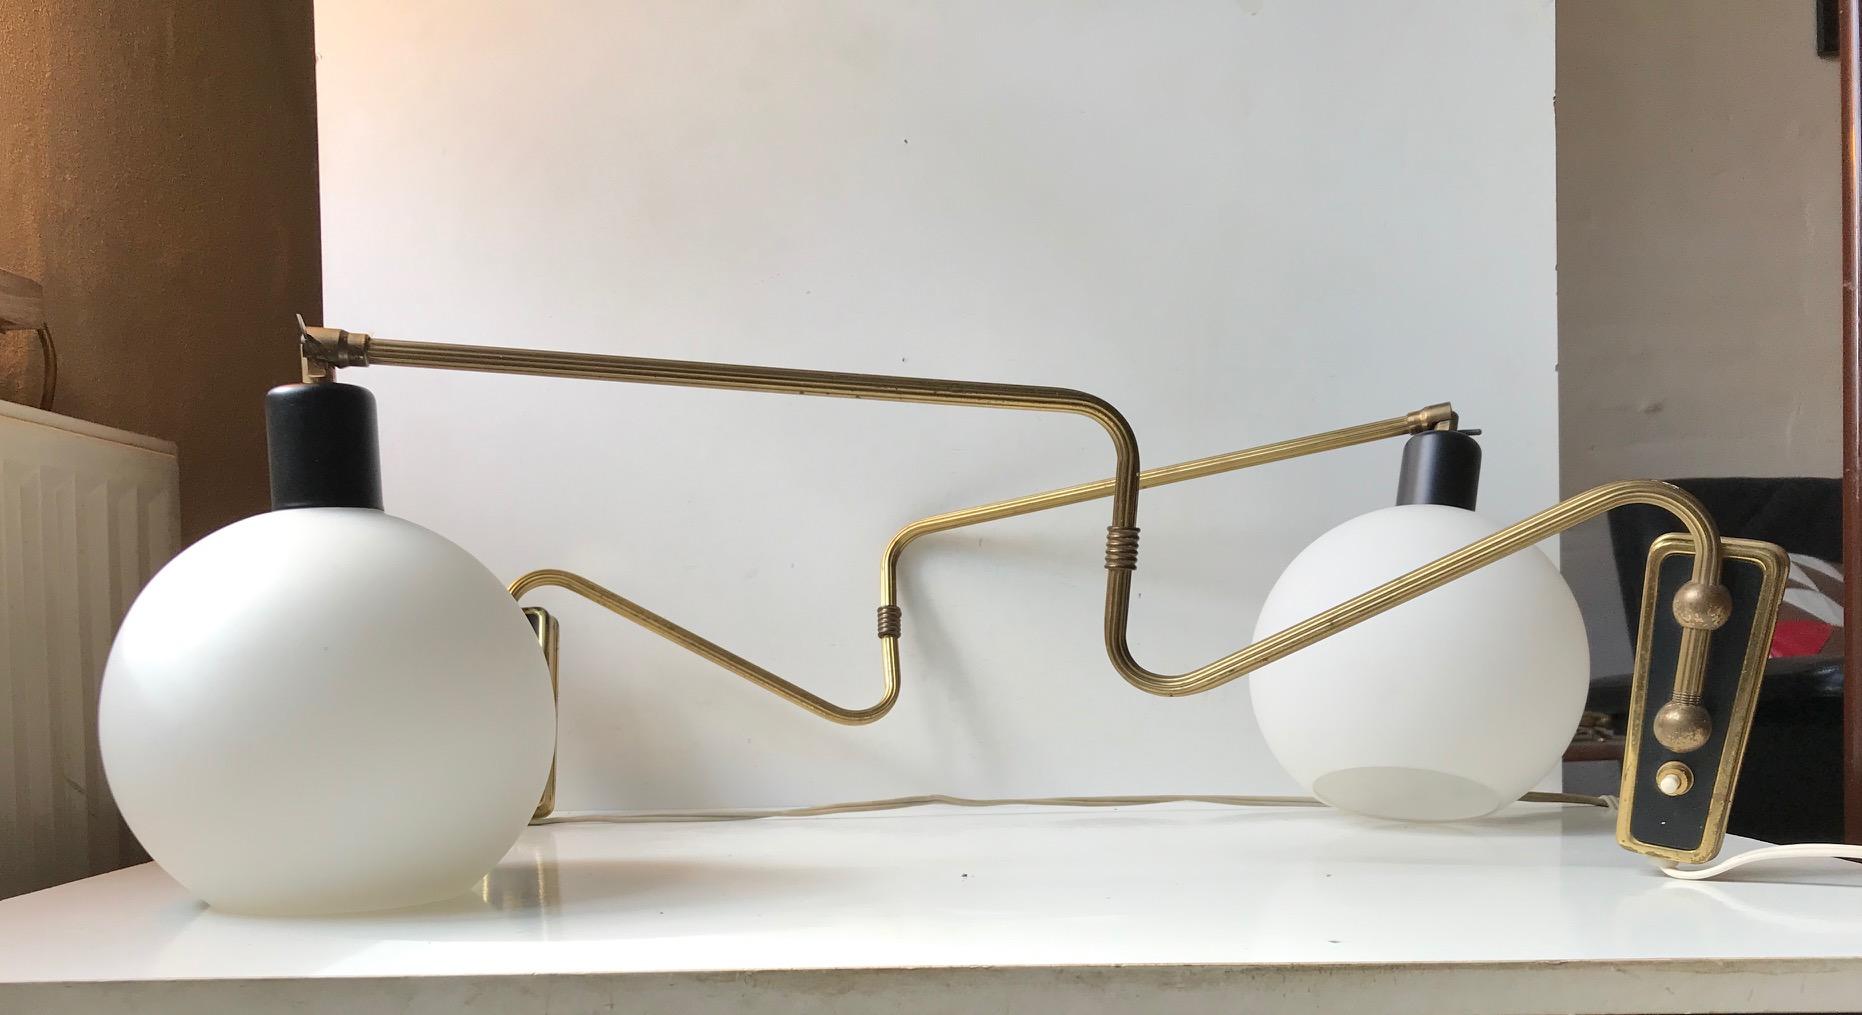 A pair of fully adjustable wall lamps composed of a brass 'body' installed with a opaline ball shade. Designed and manufactured by Laoni in Copenhagen, Denmark. The style is reminiscent of Svend Aage Holm-Sørensen. The shade may have been a later